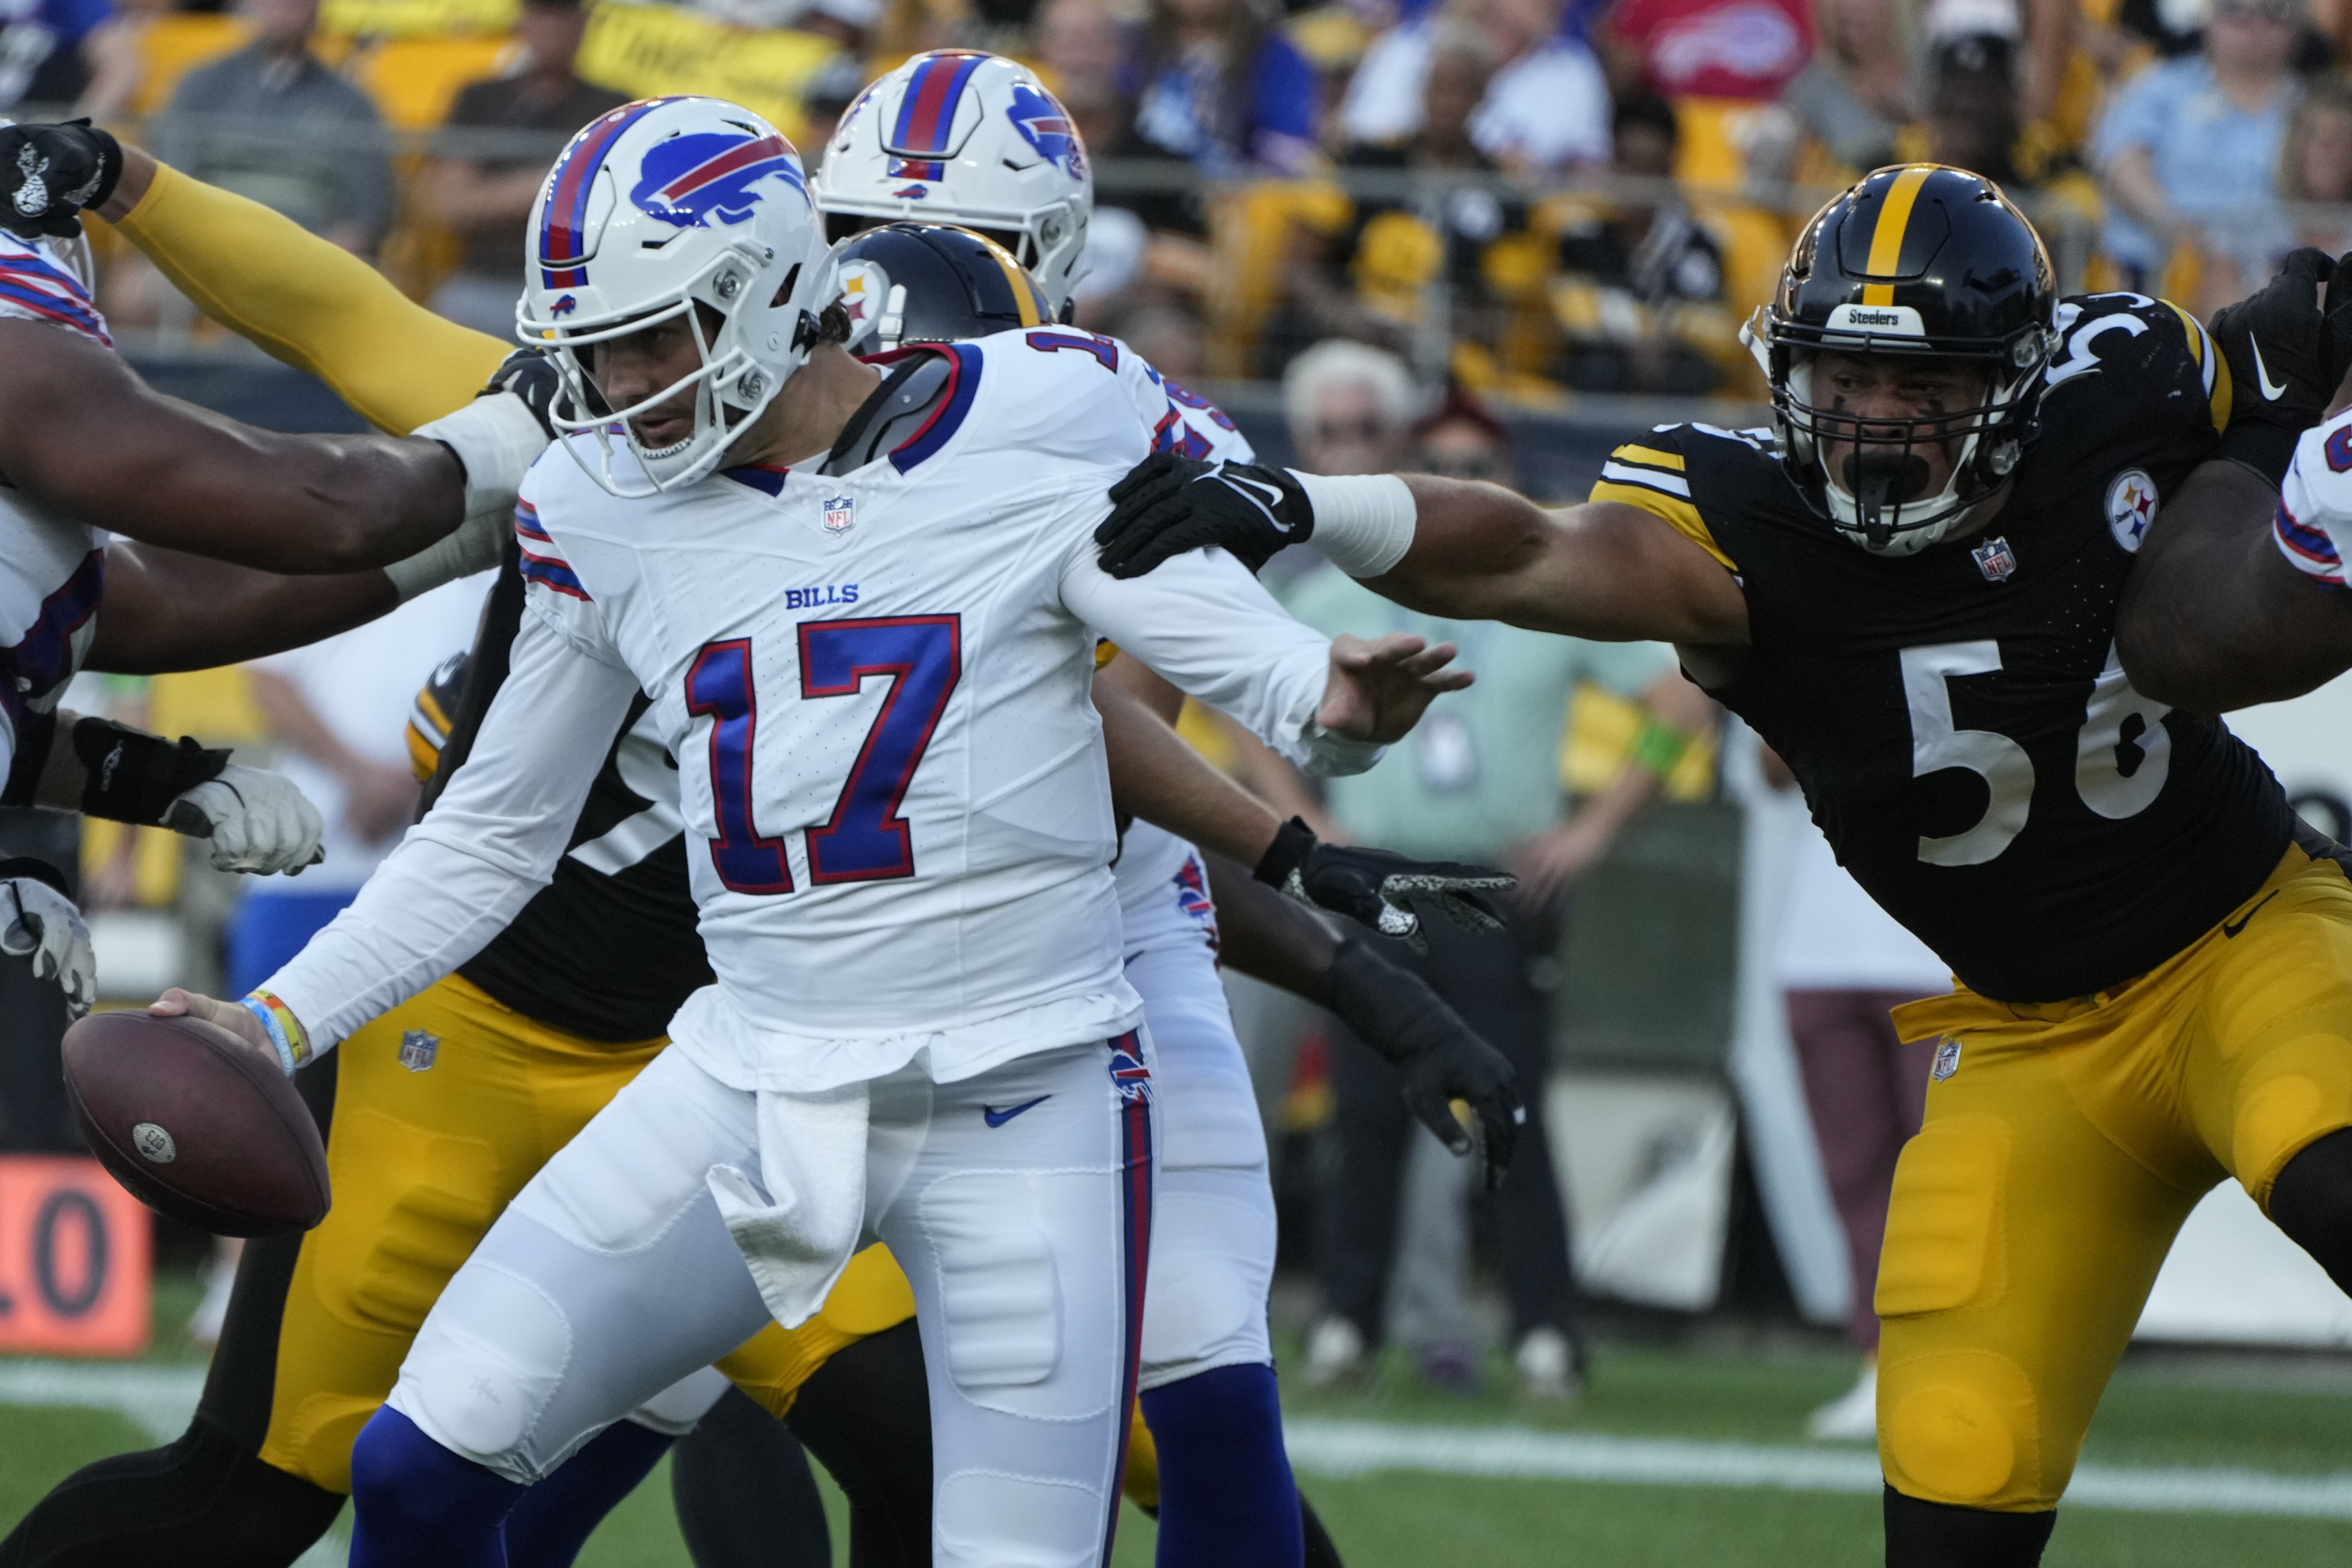 Full highlights of the Bills' 27-15 preseason loss to the Steelers